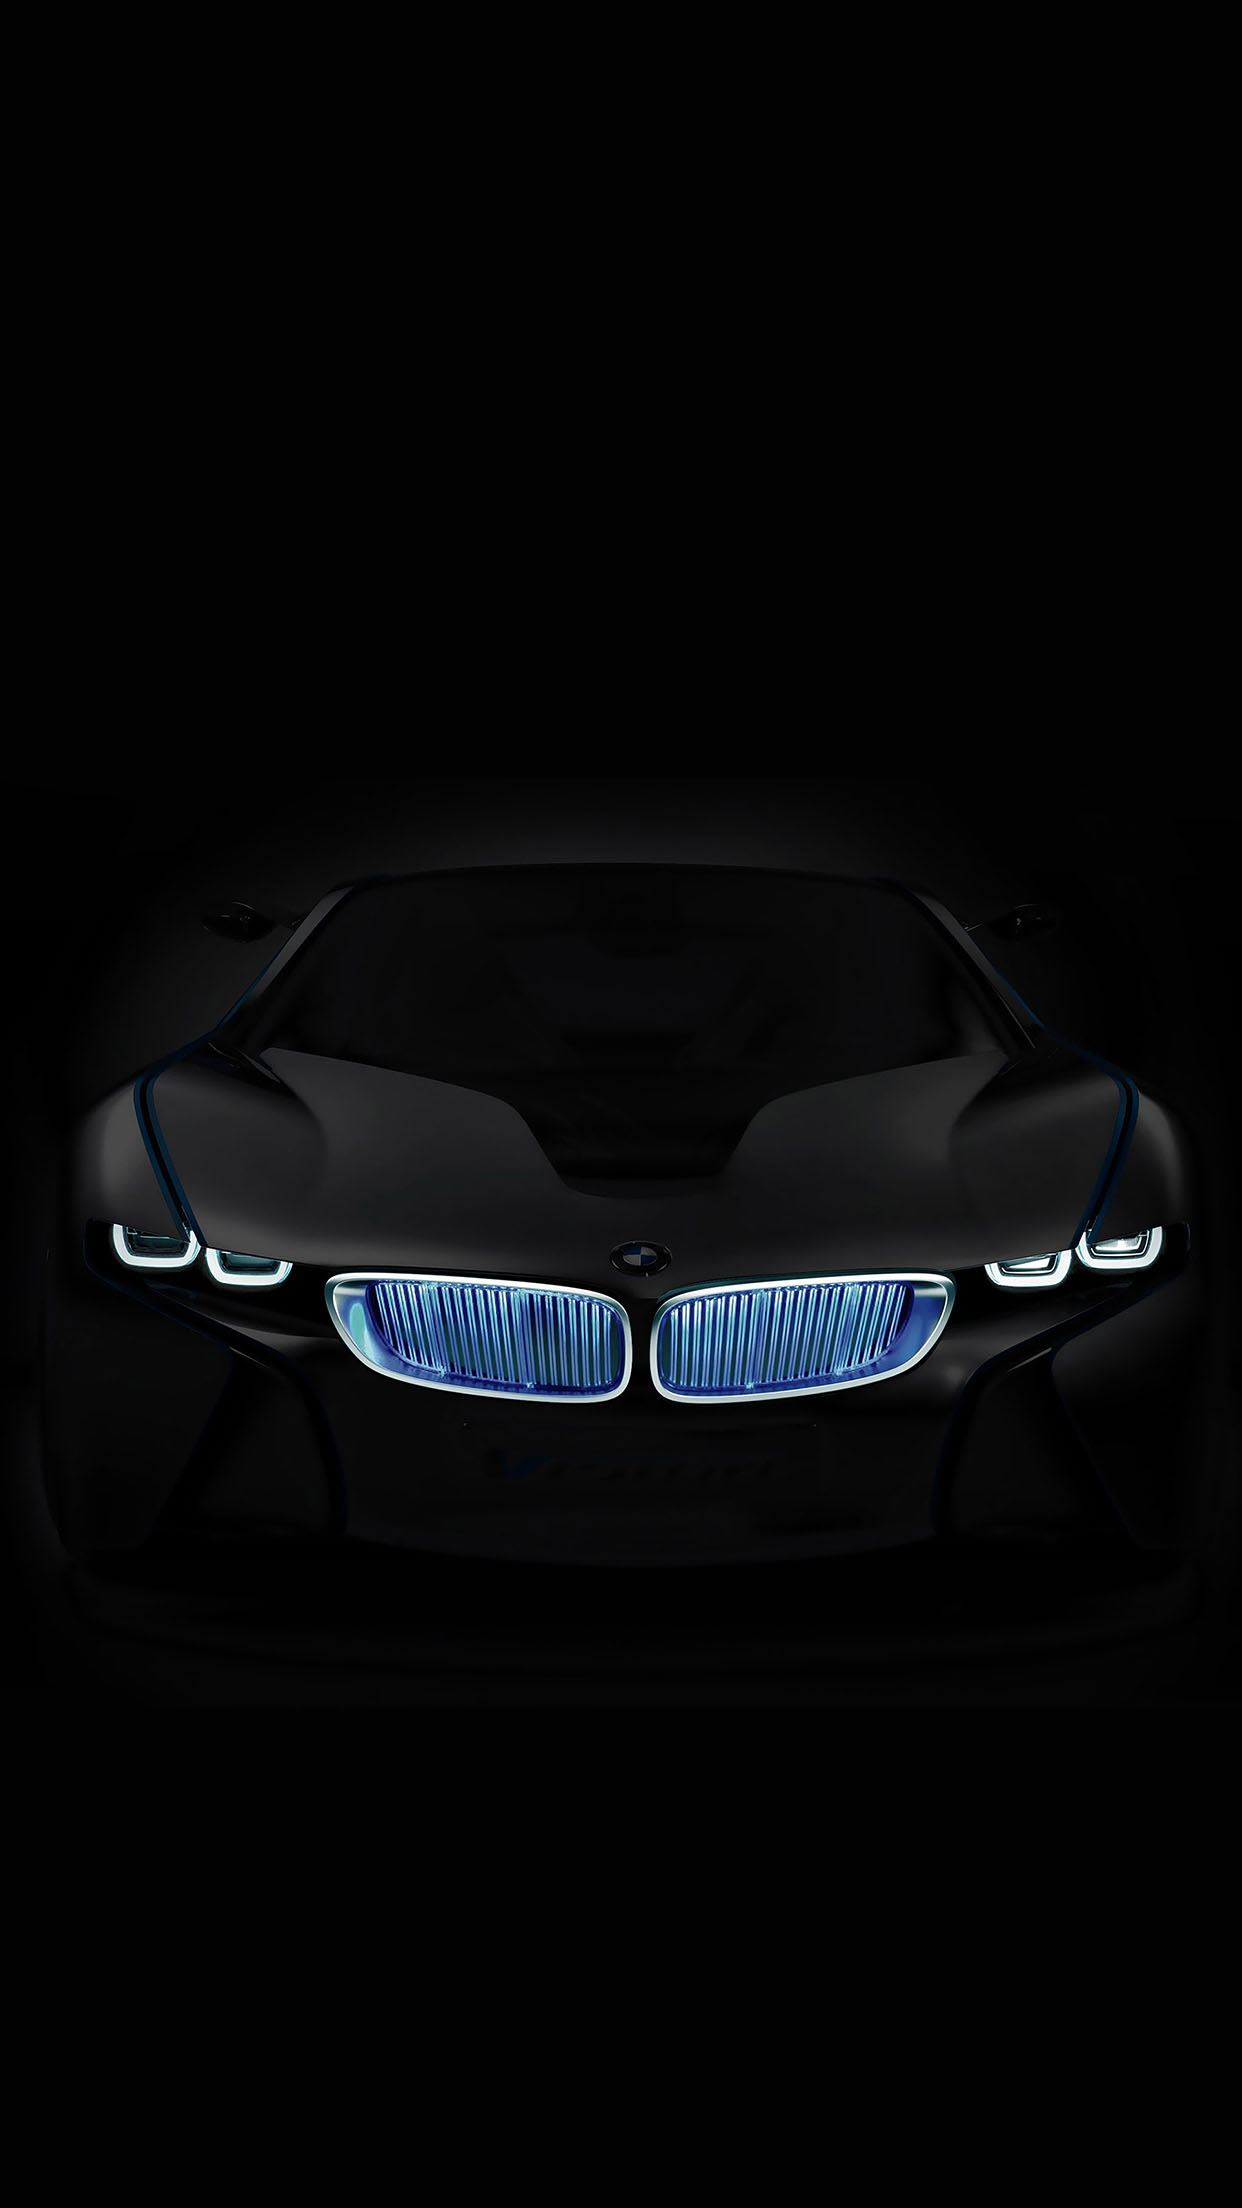 BMW In The Dark Android Wallpaper free download